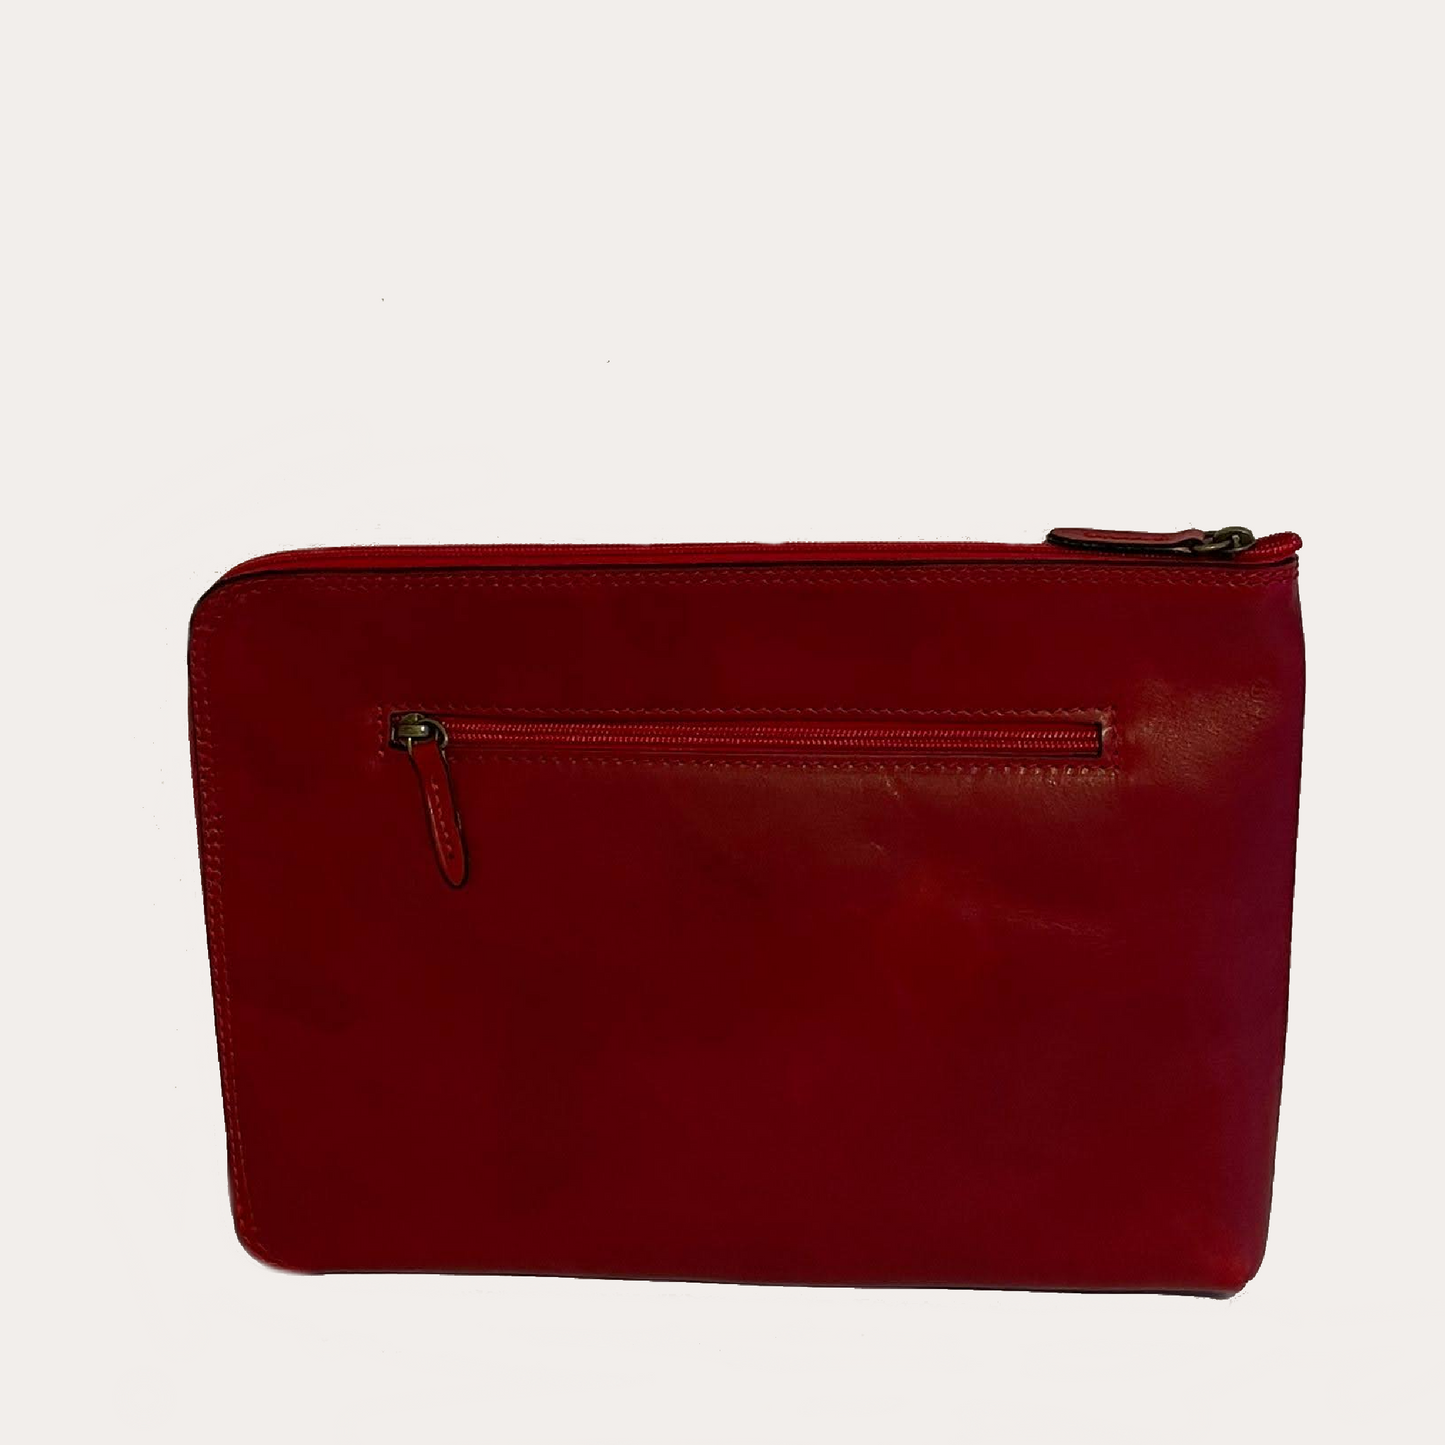 13'' Red Leather Document/Computer Sleeve